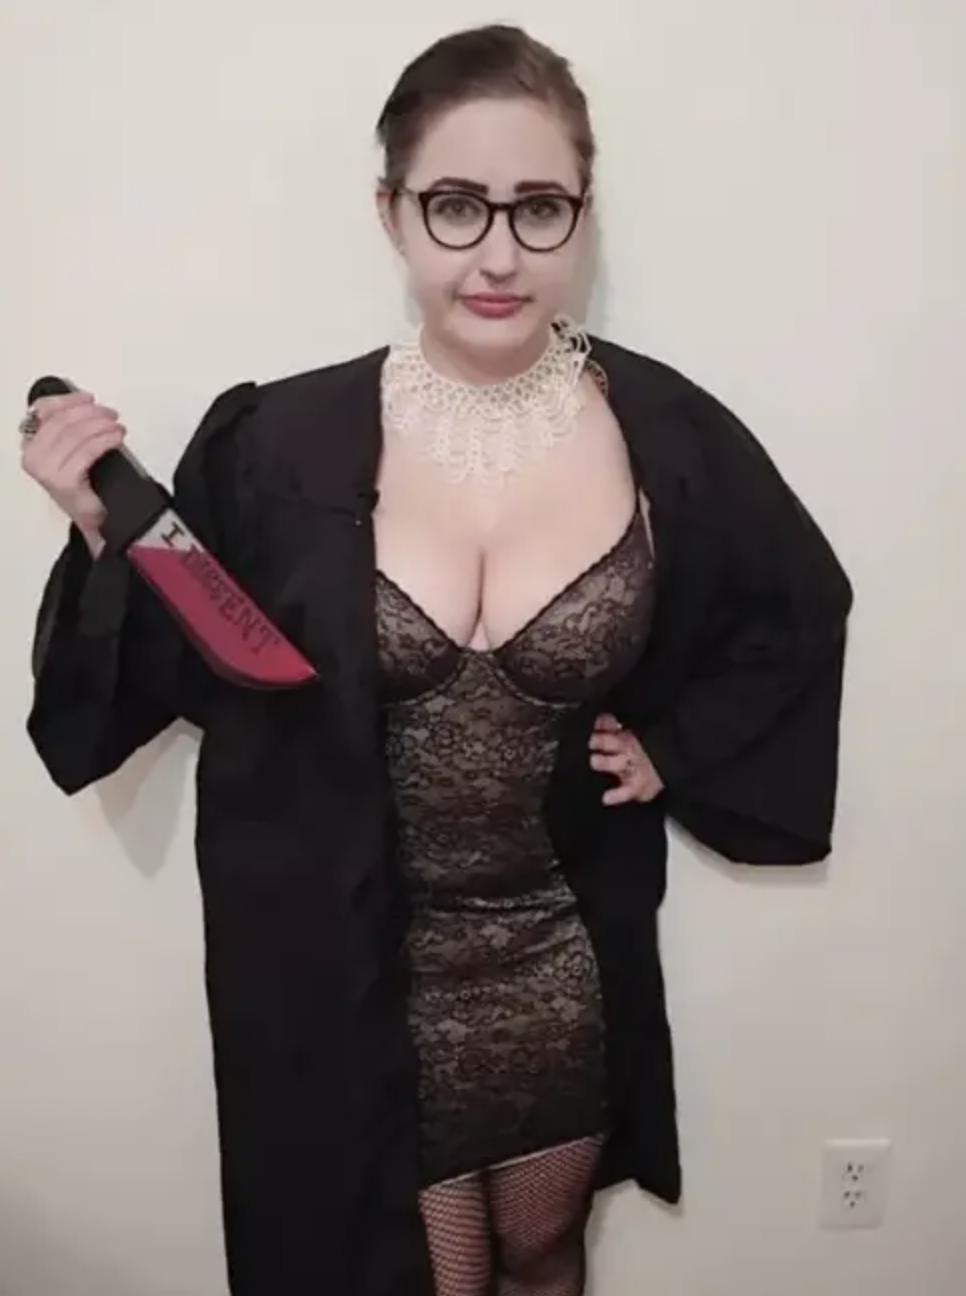 A woman in a black robe, short lacy dress, and fishnets, wearing glasses and holding a knife